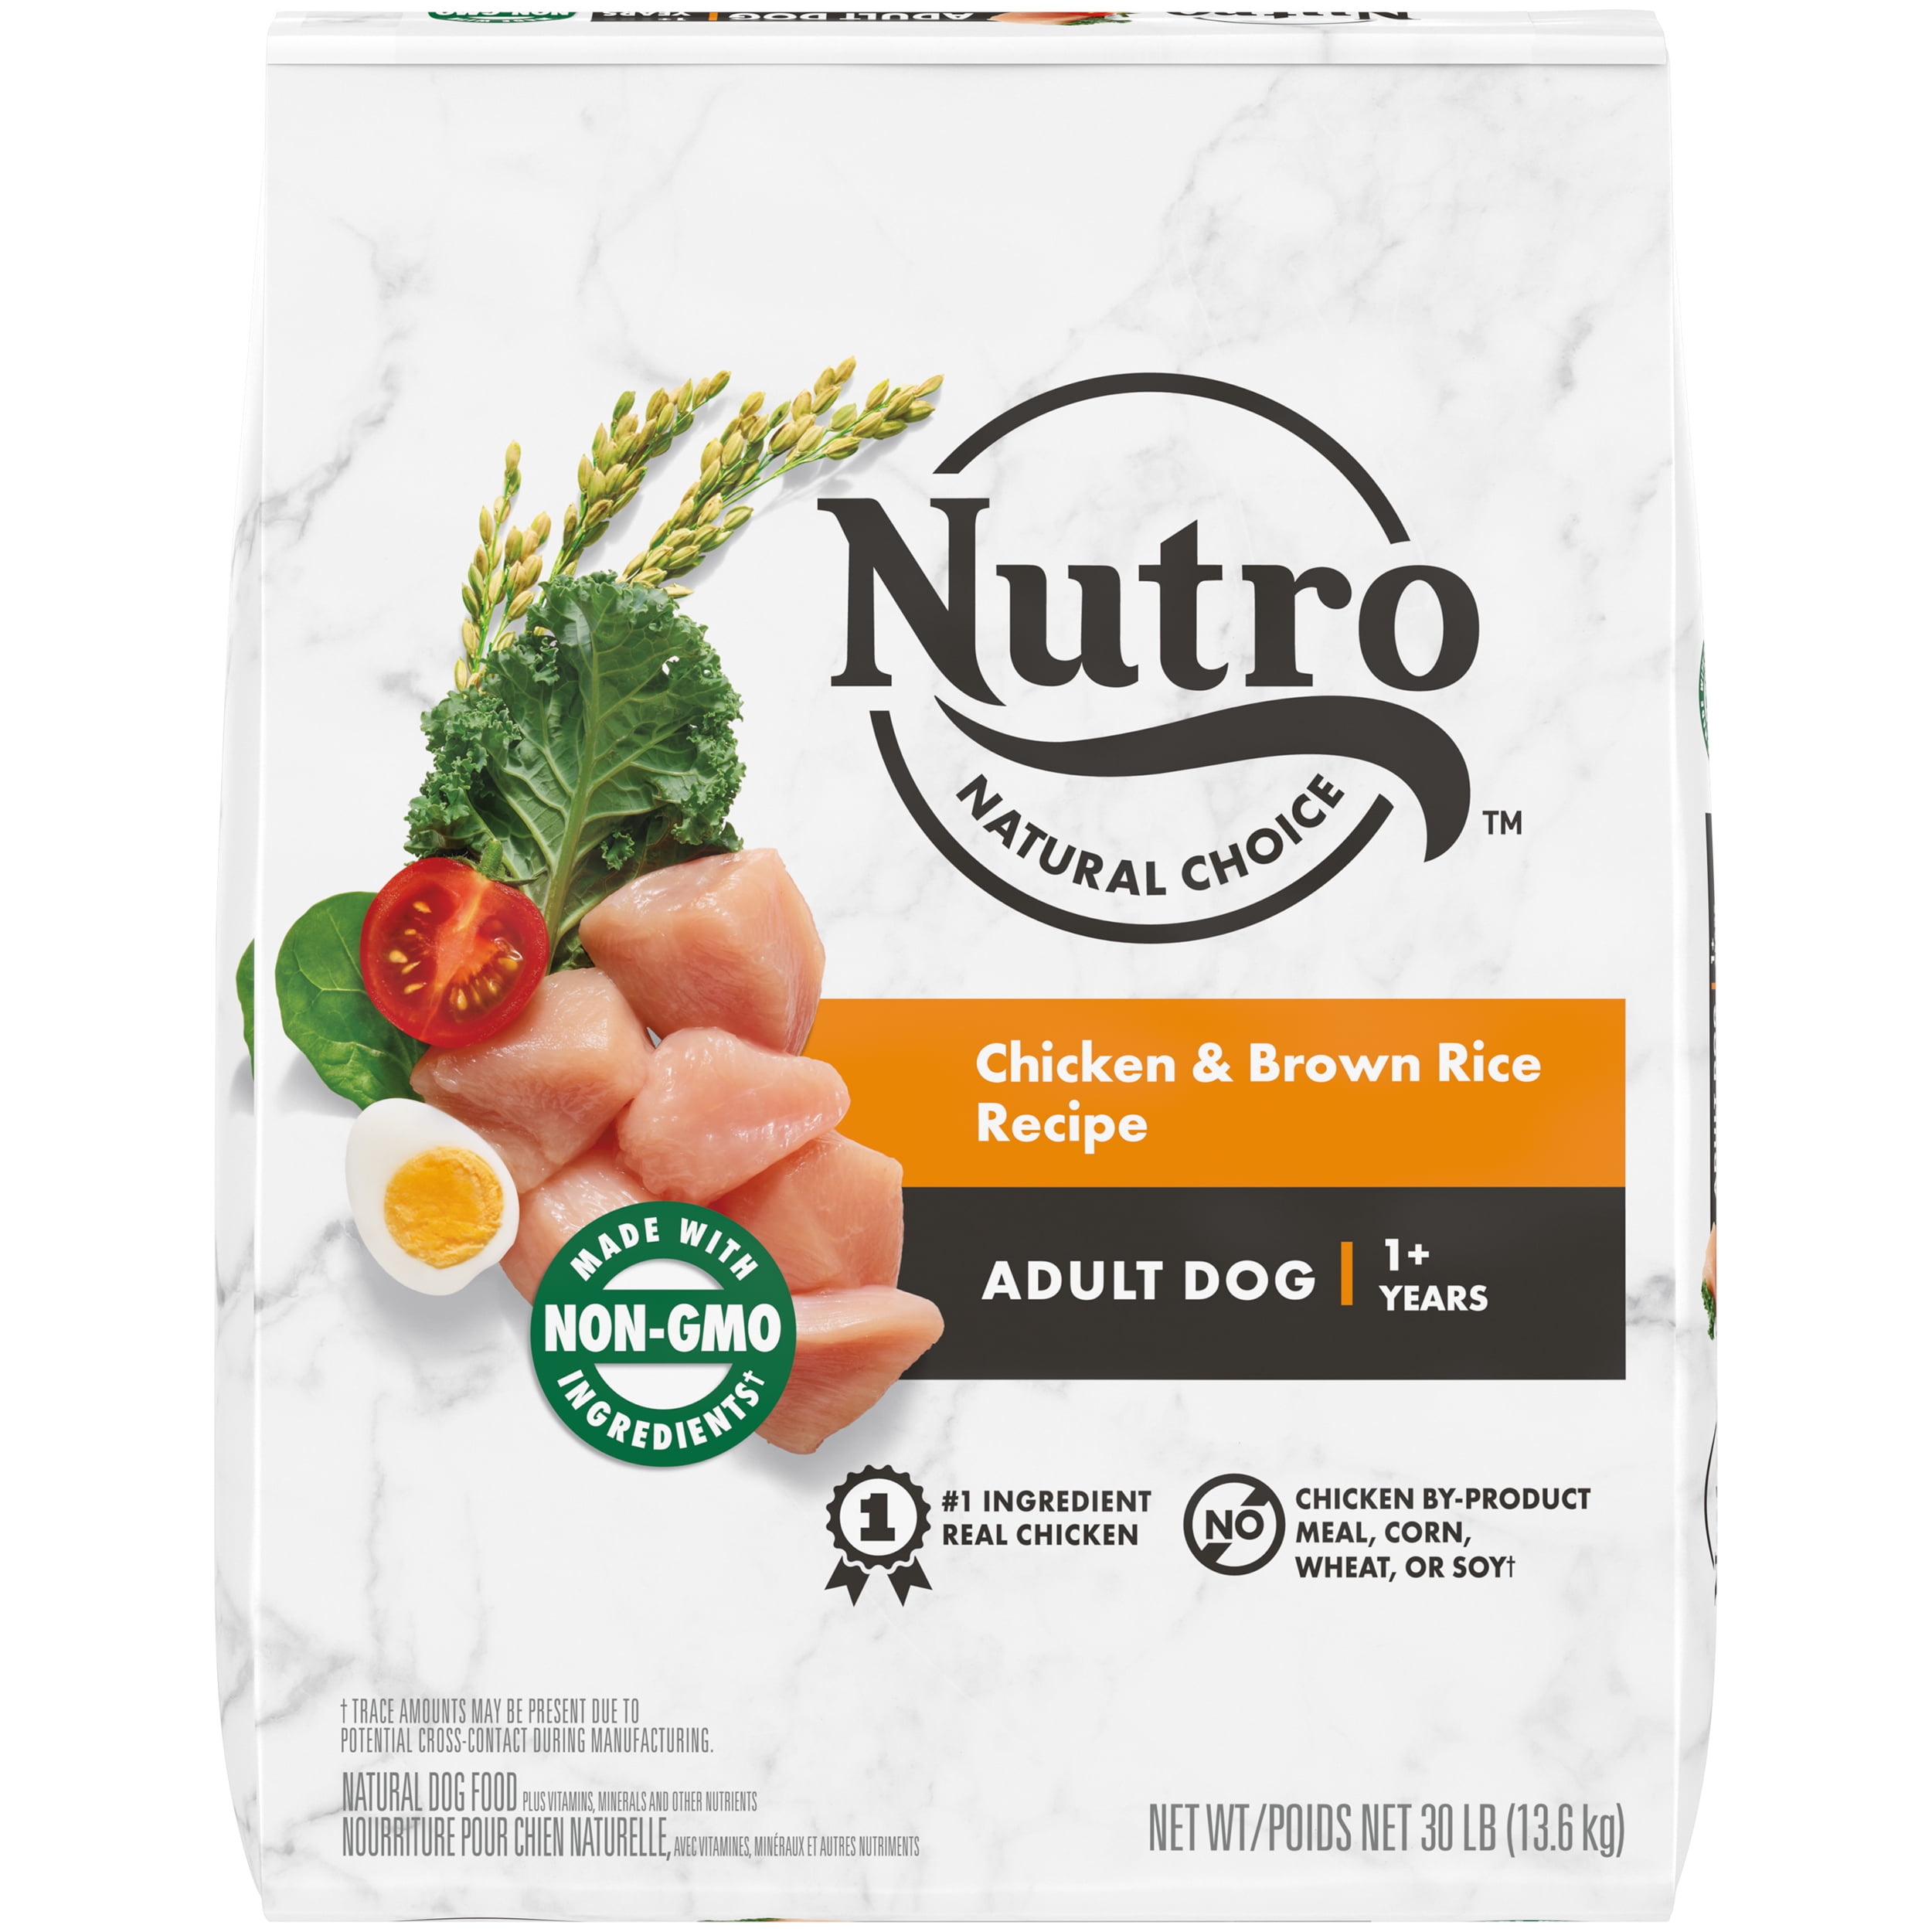 NUTRO NATURAL CHOICE Adult Dry Dog Food, Chicken & Brown Rice Recipe